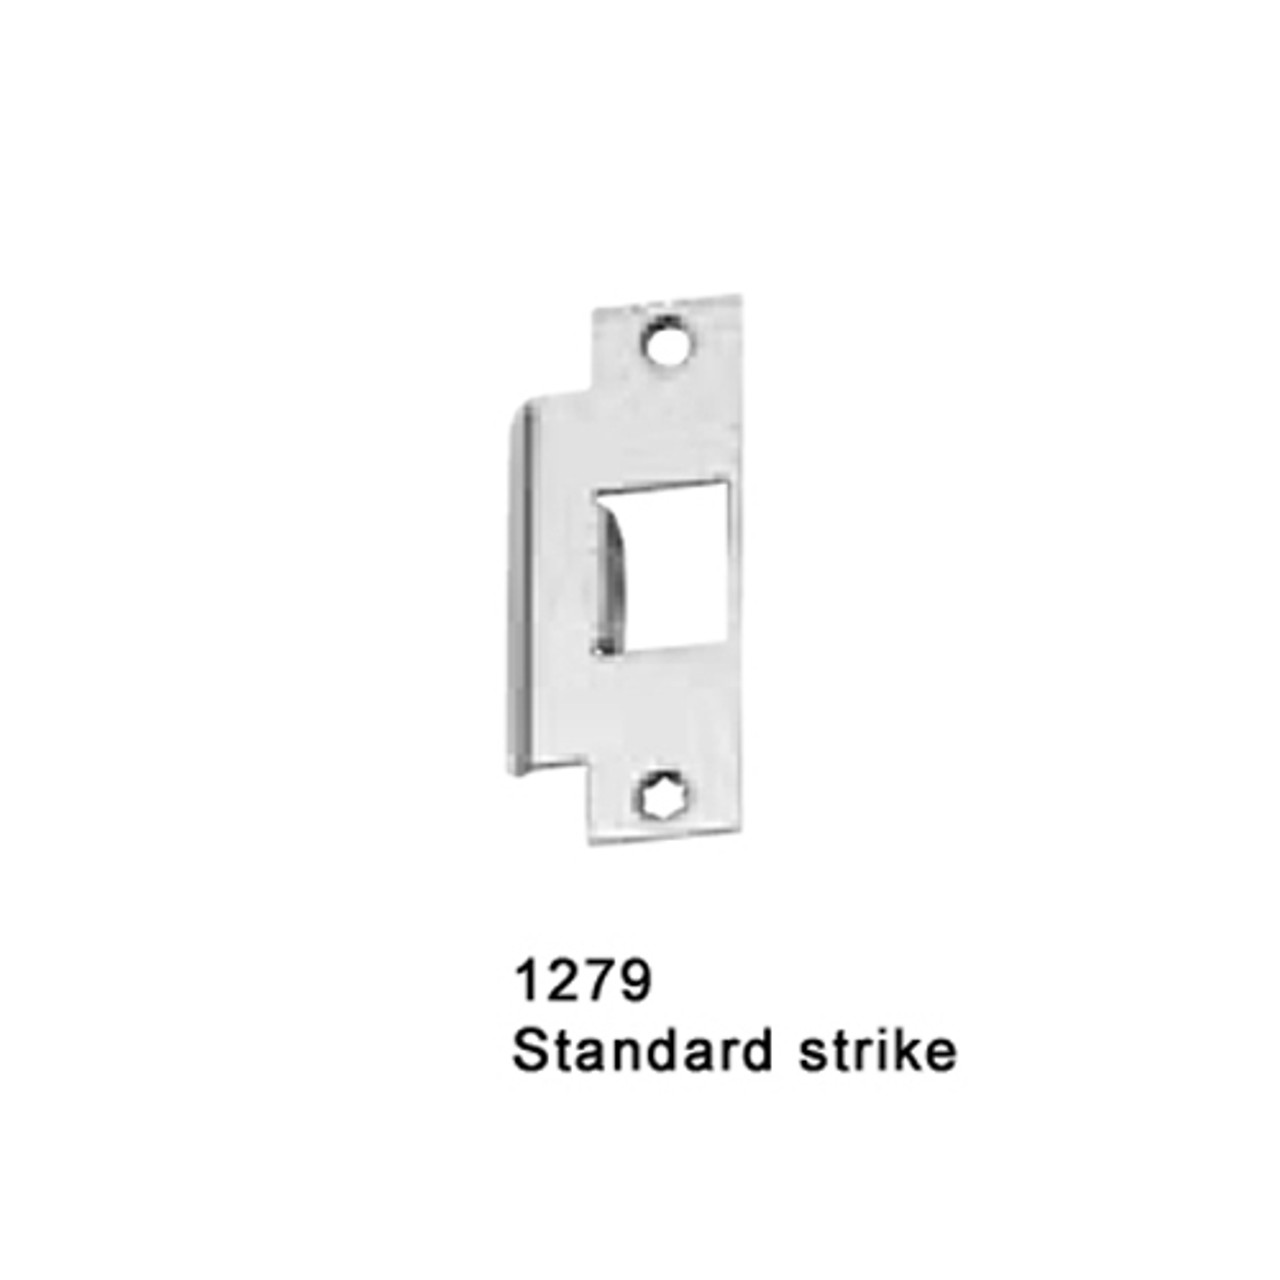 CD25-M-TP-BE-US26D-3-RHR Falcon 25 Series Mortise Lock Devices 512TP-BE Thumbpiece Trim with Blank Escutcheon in Satin Chrome